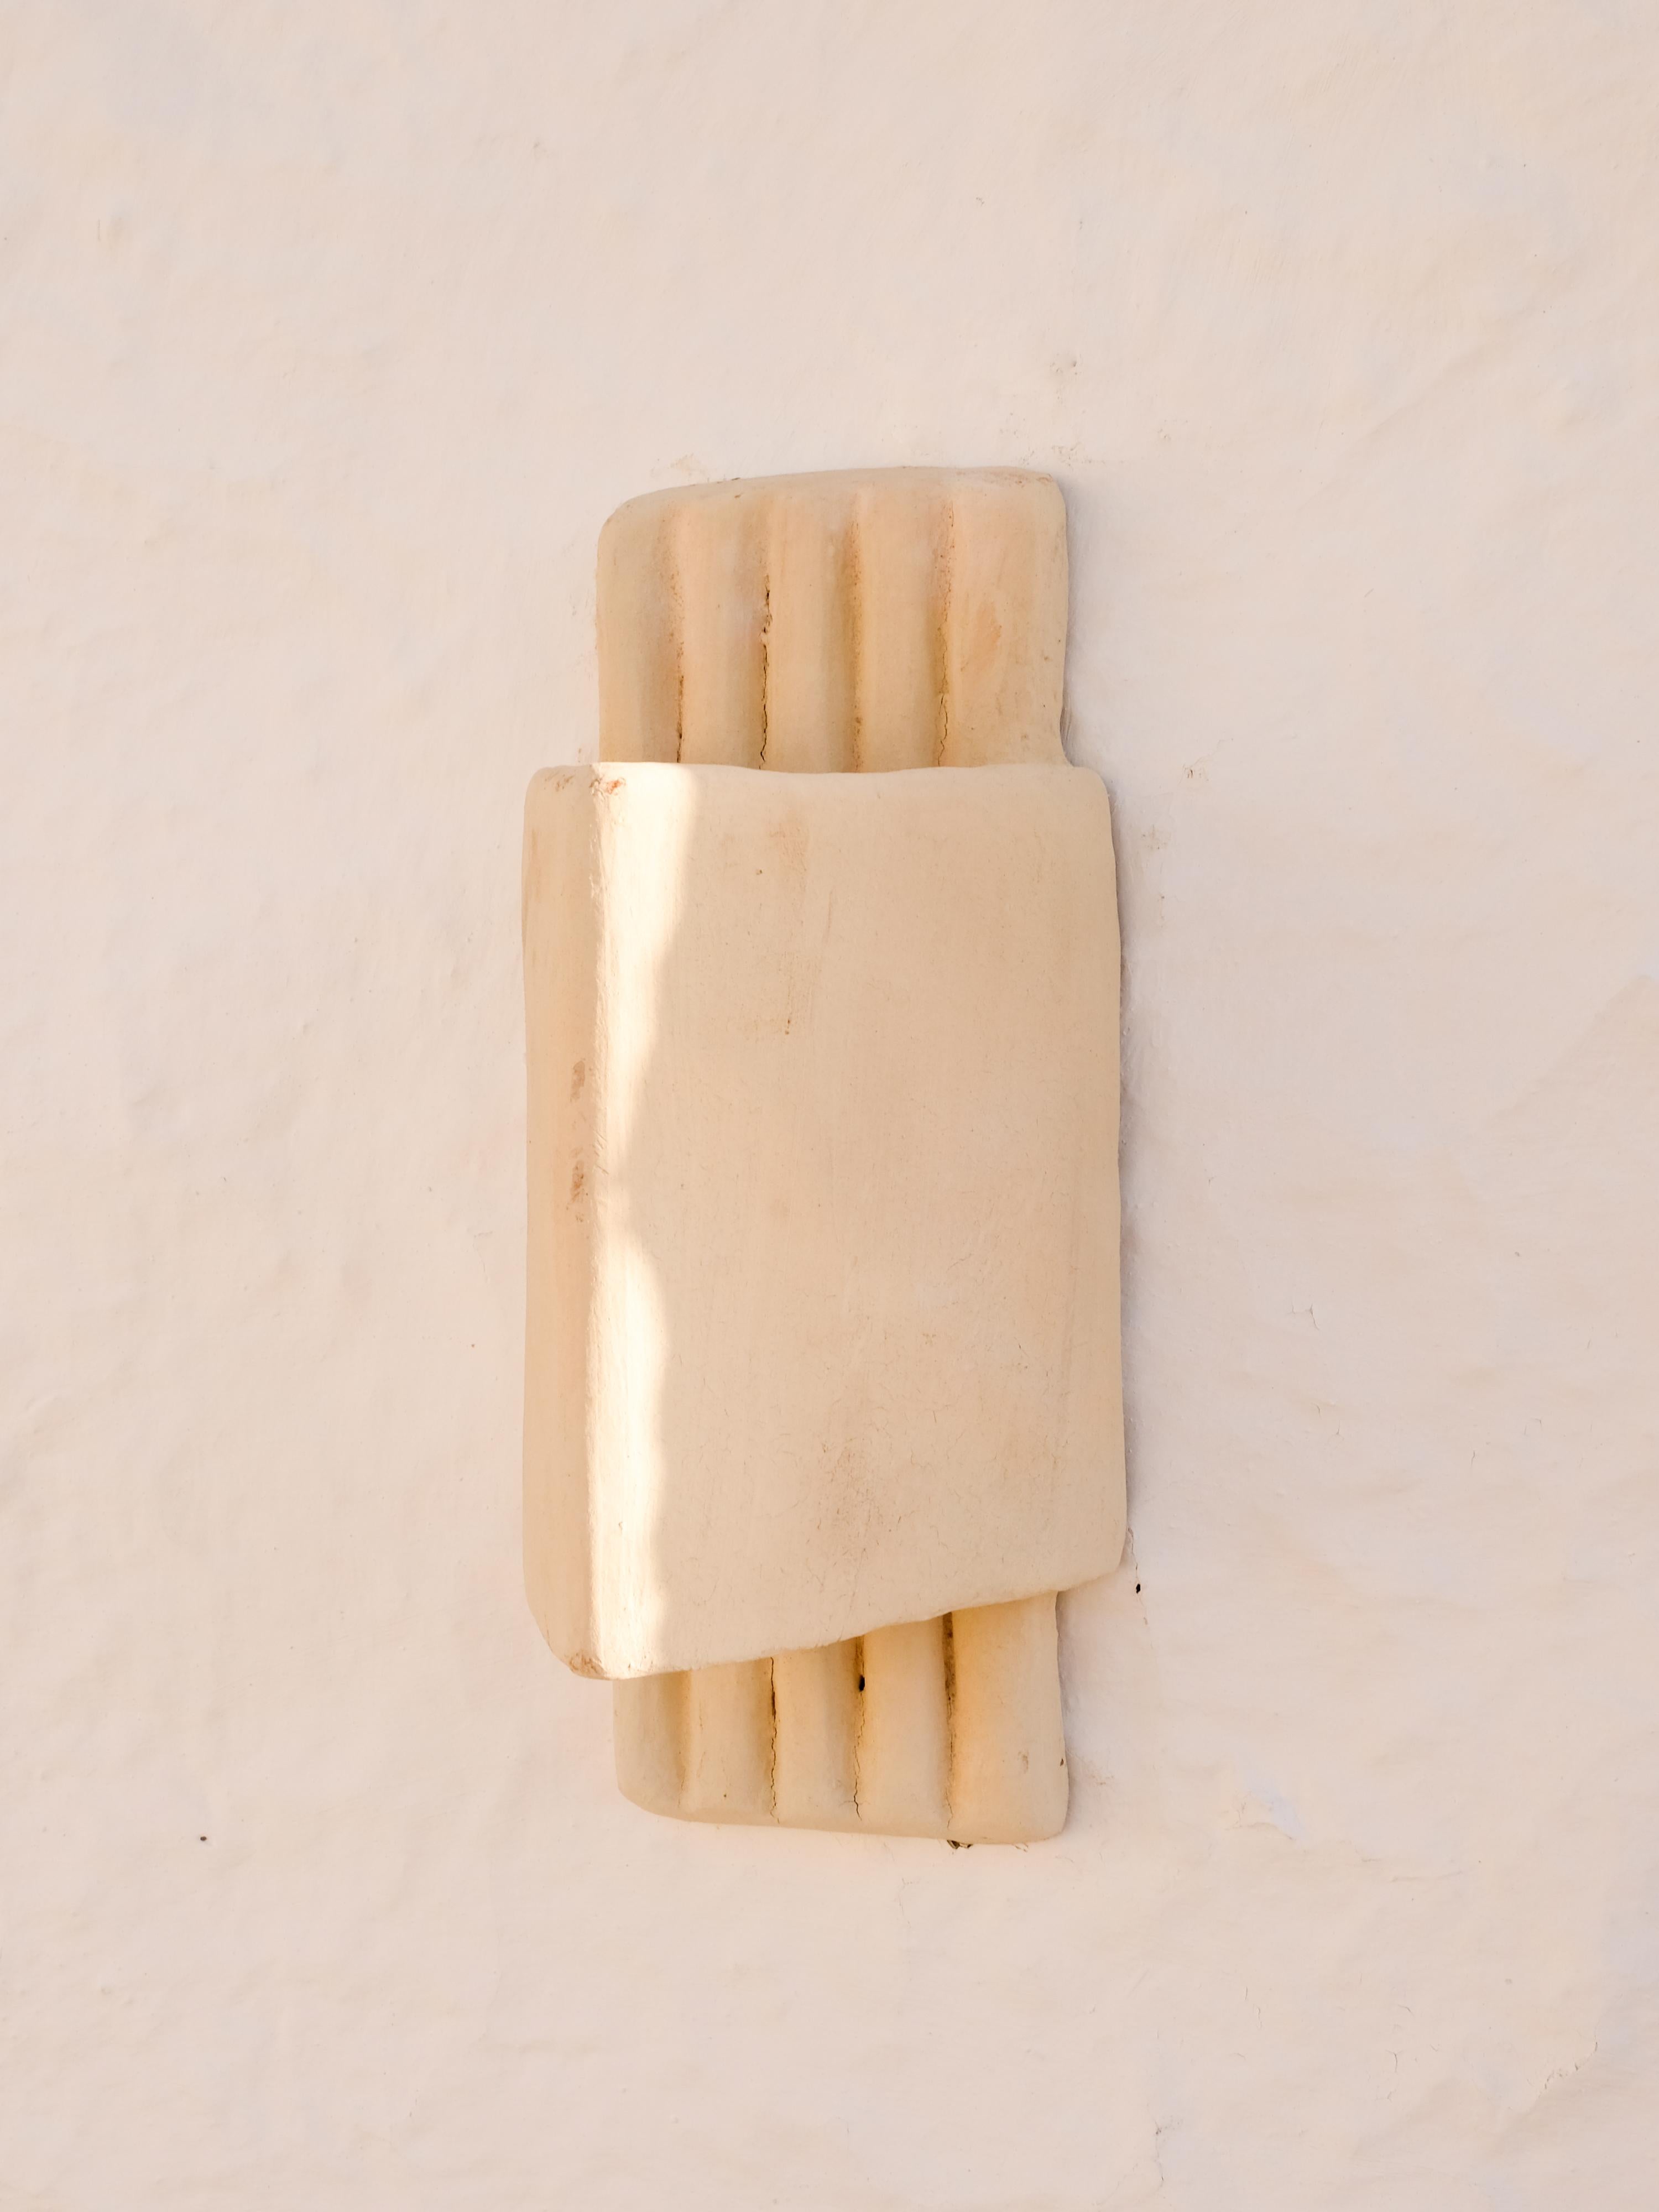 - Handbuilt white ceramic wall light
- slip applied with natural pigments as whitewash with water
- made of clay collected from the potter's surroundings.
- made in the Moroccan Rif mountains by the potter Houda.
- co-created by the potter Houda x